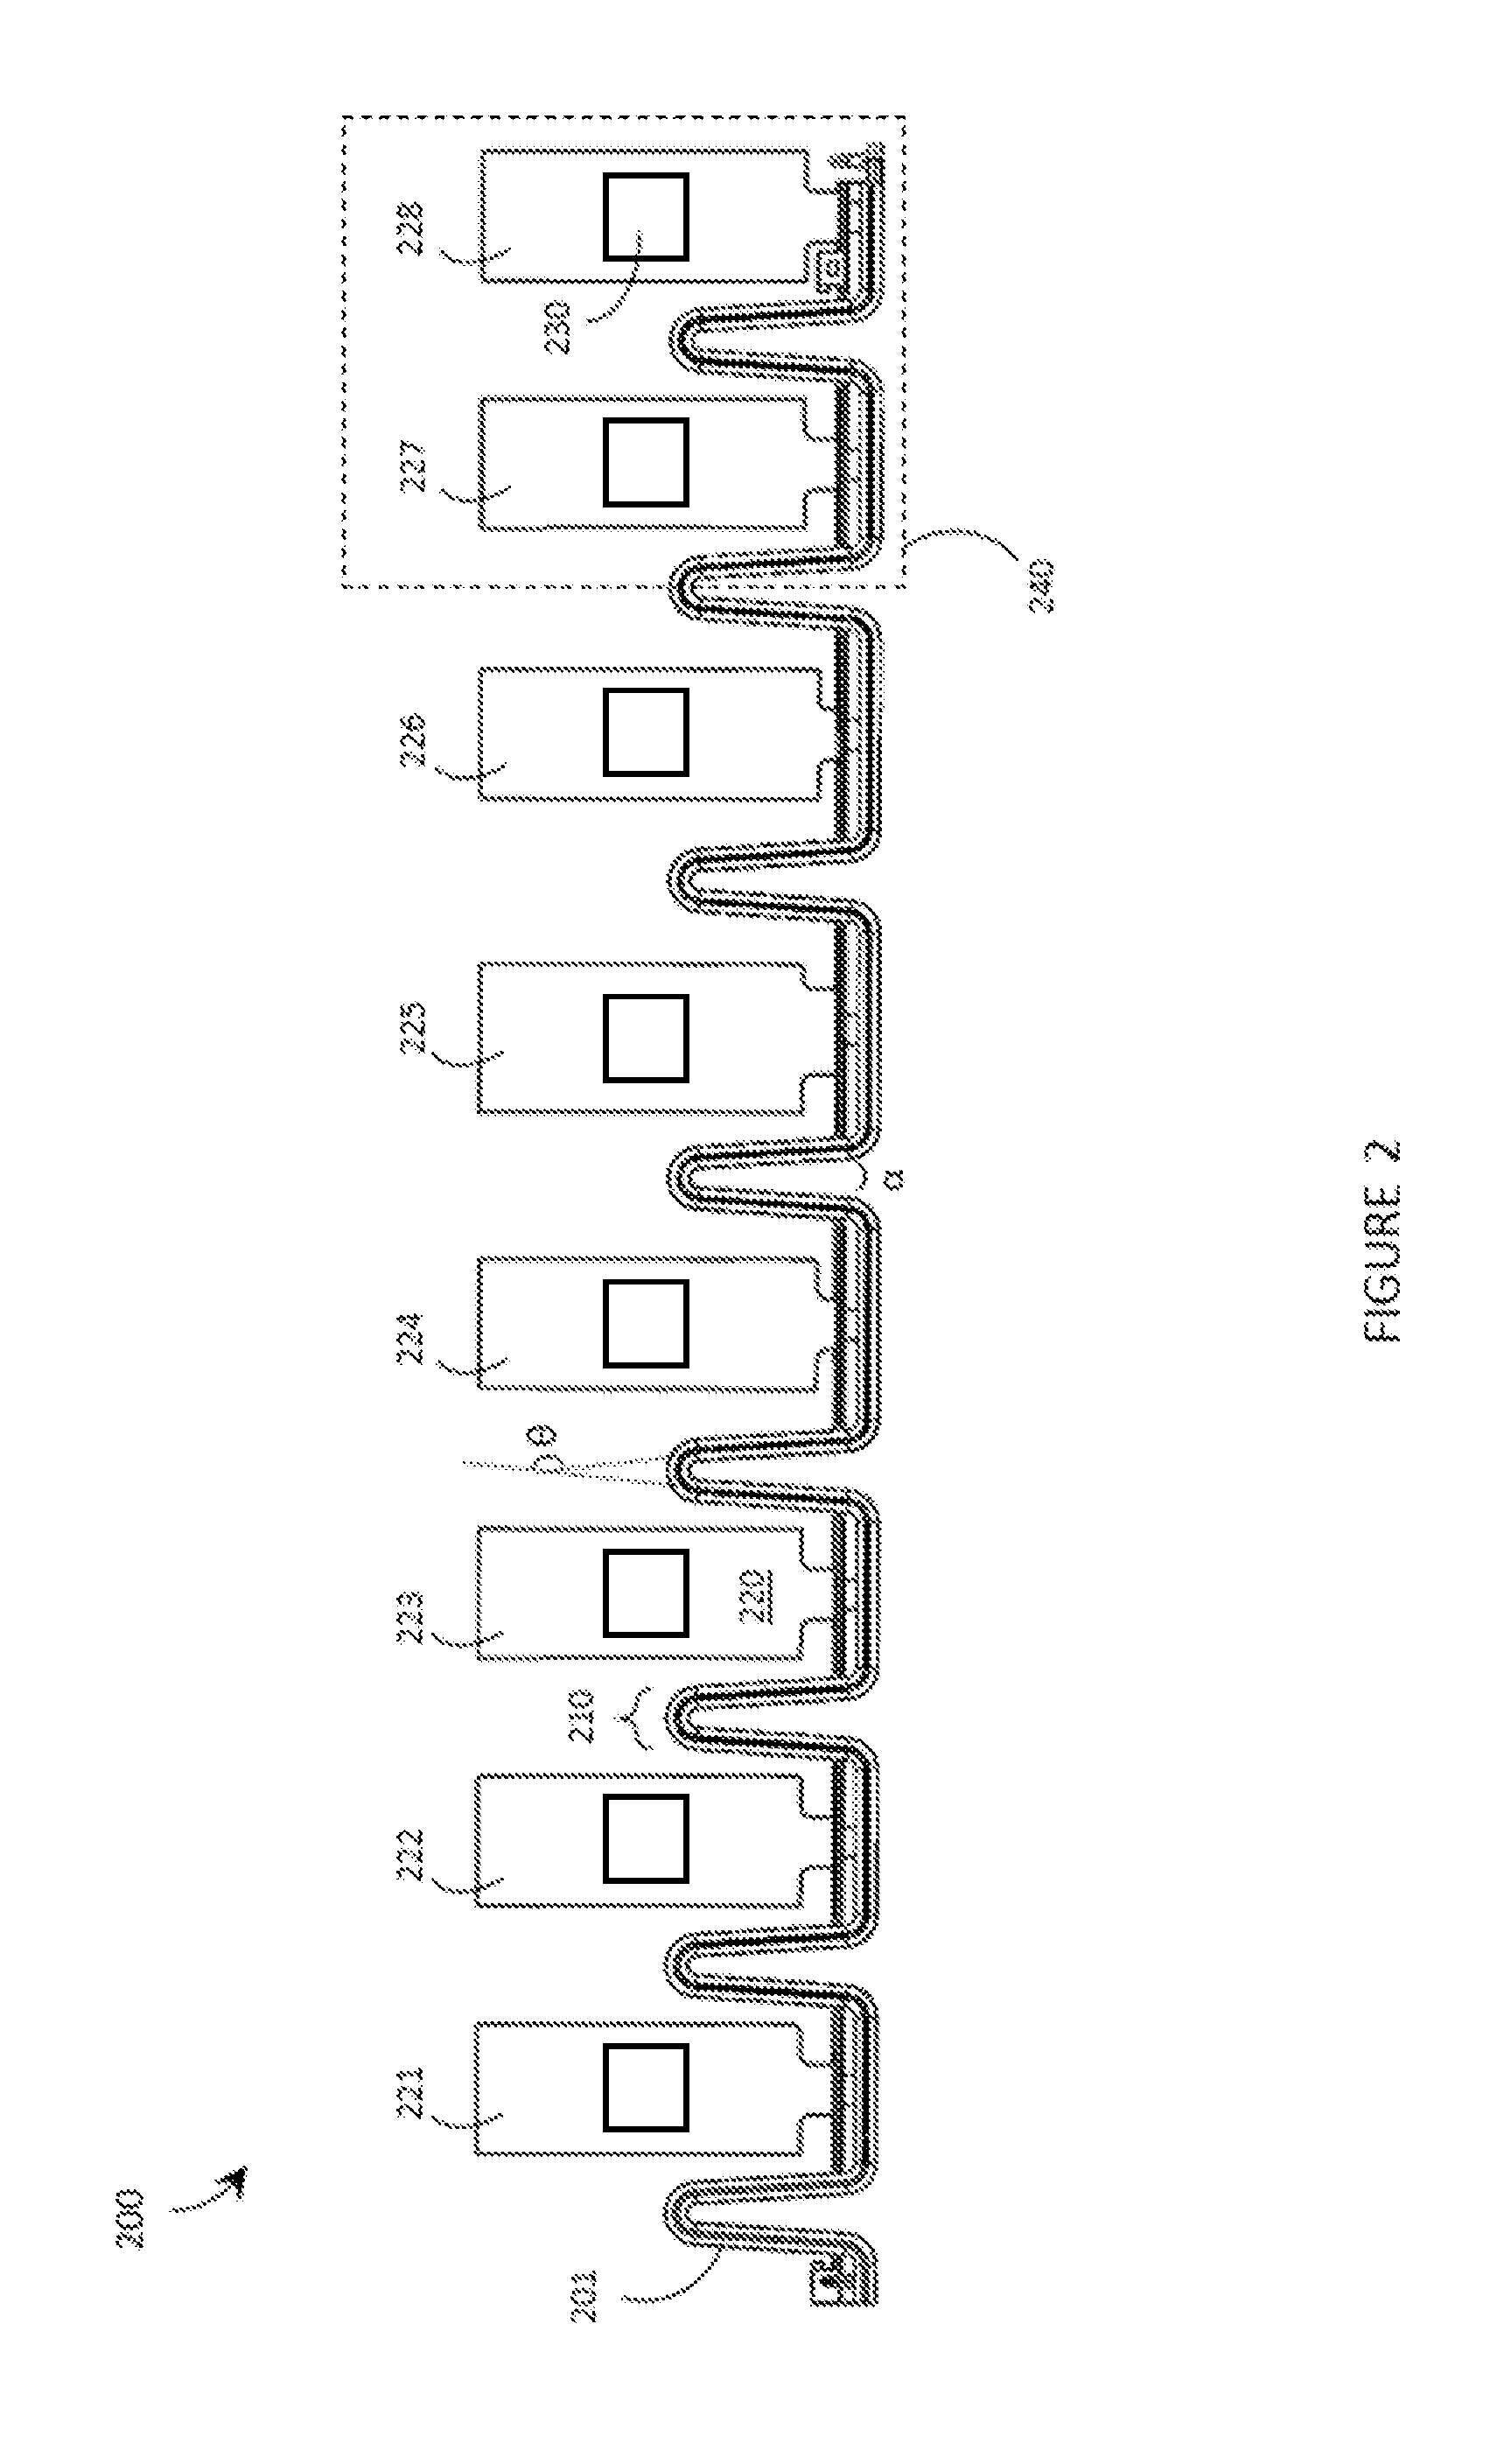 Systems, articles, and methods for elastic electrical cables and wearable electronic devices employing same